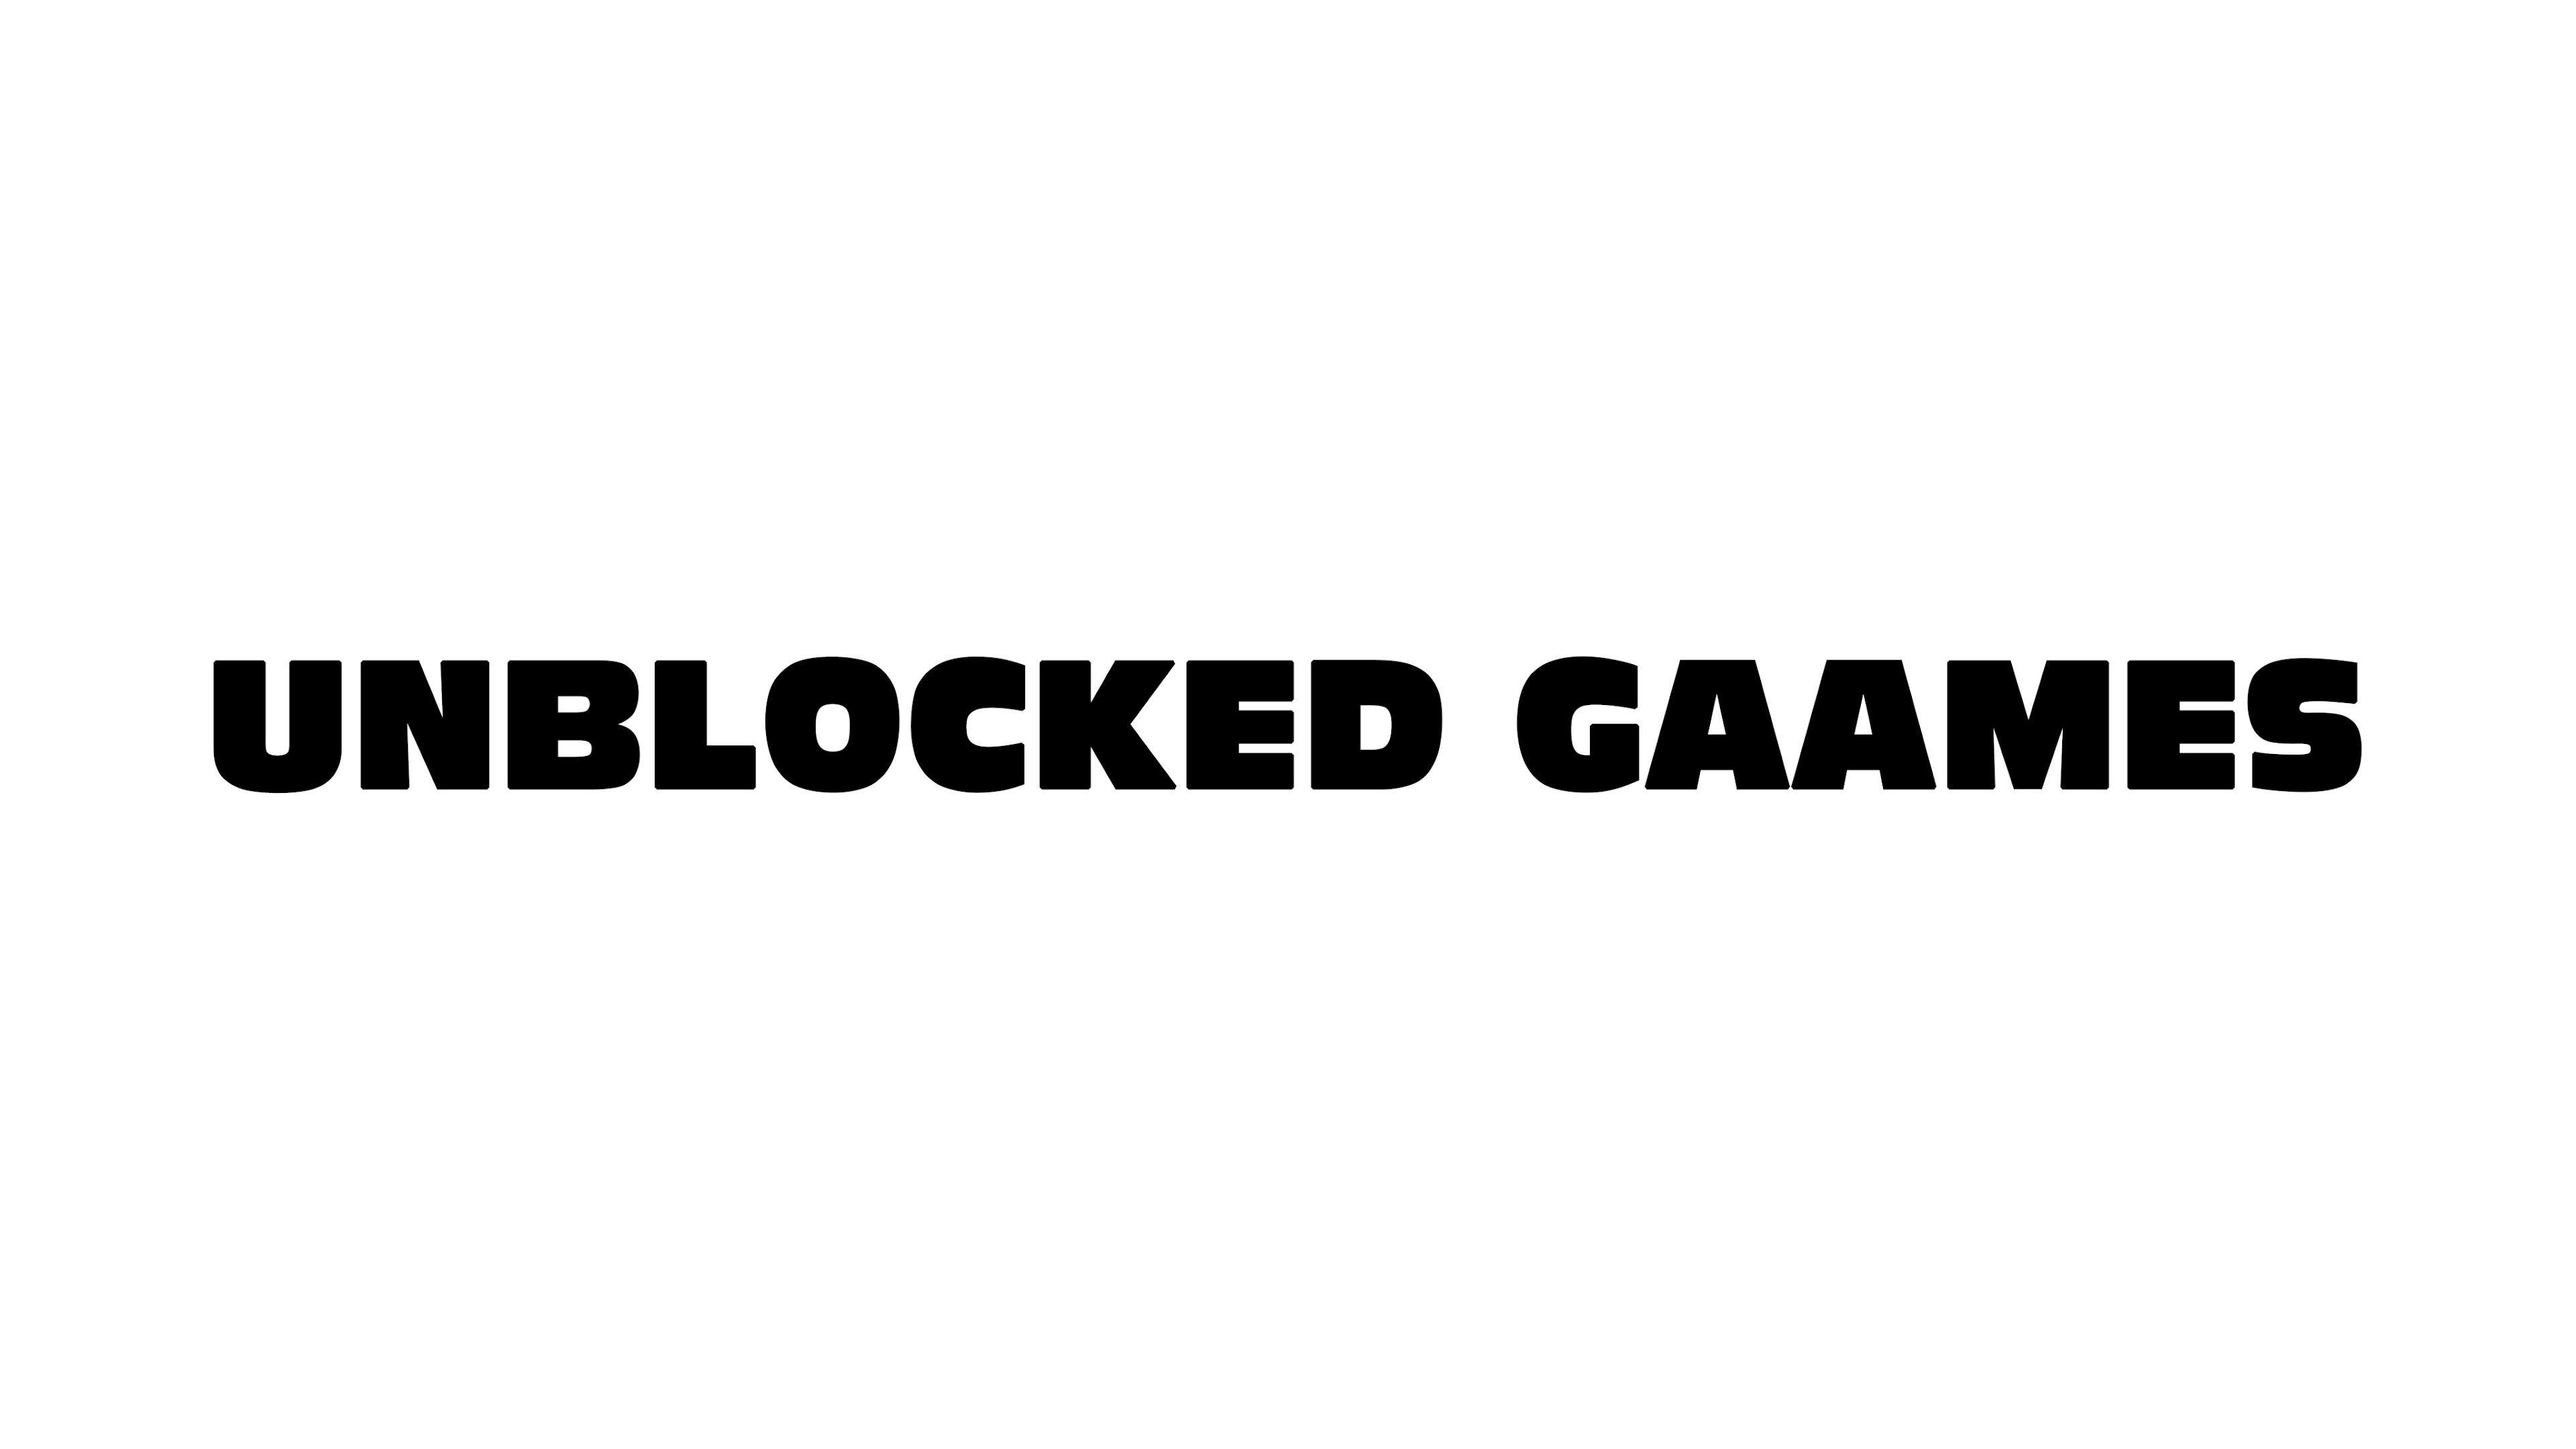 unblocked games 66 to play school 